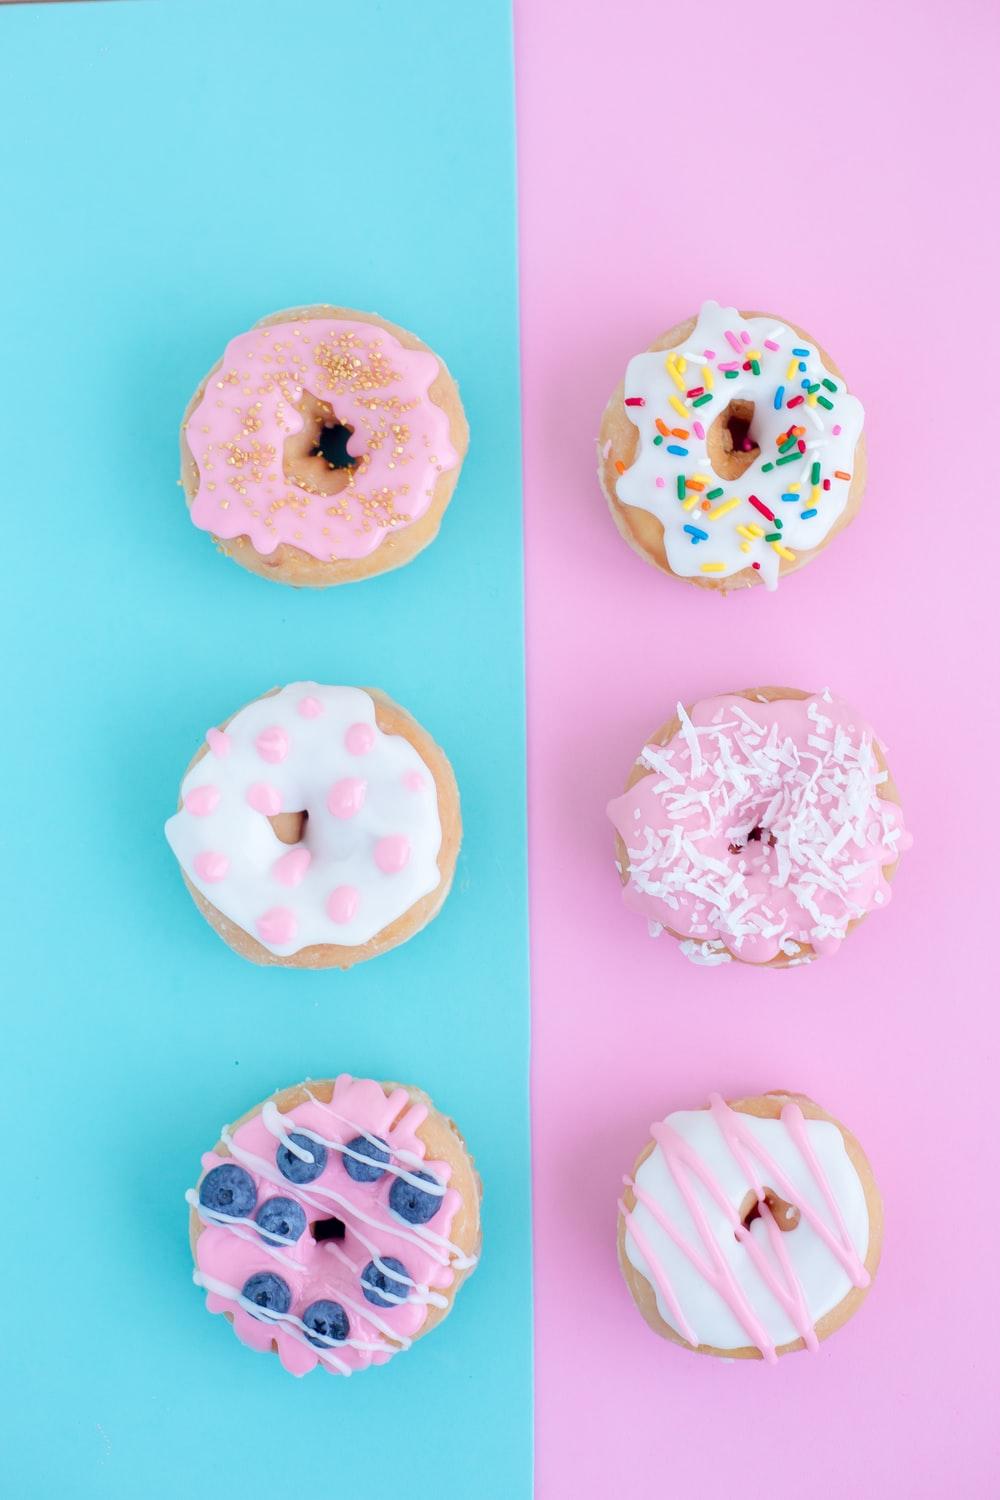 Donut Picture. Download Free Image